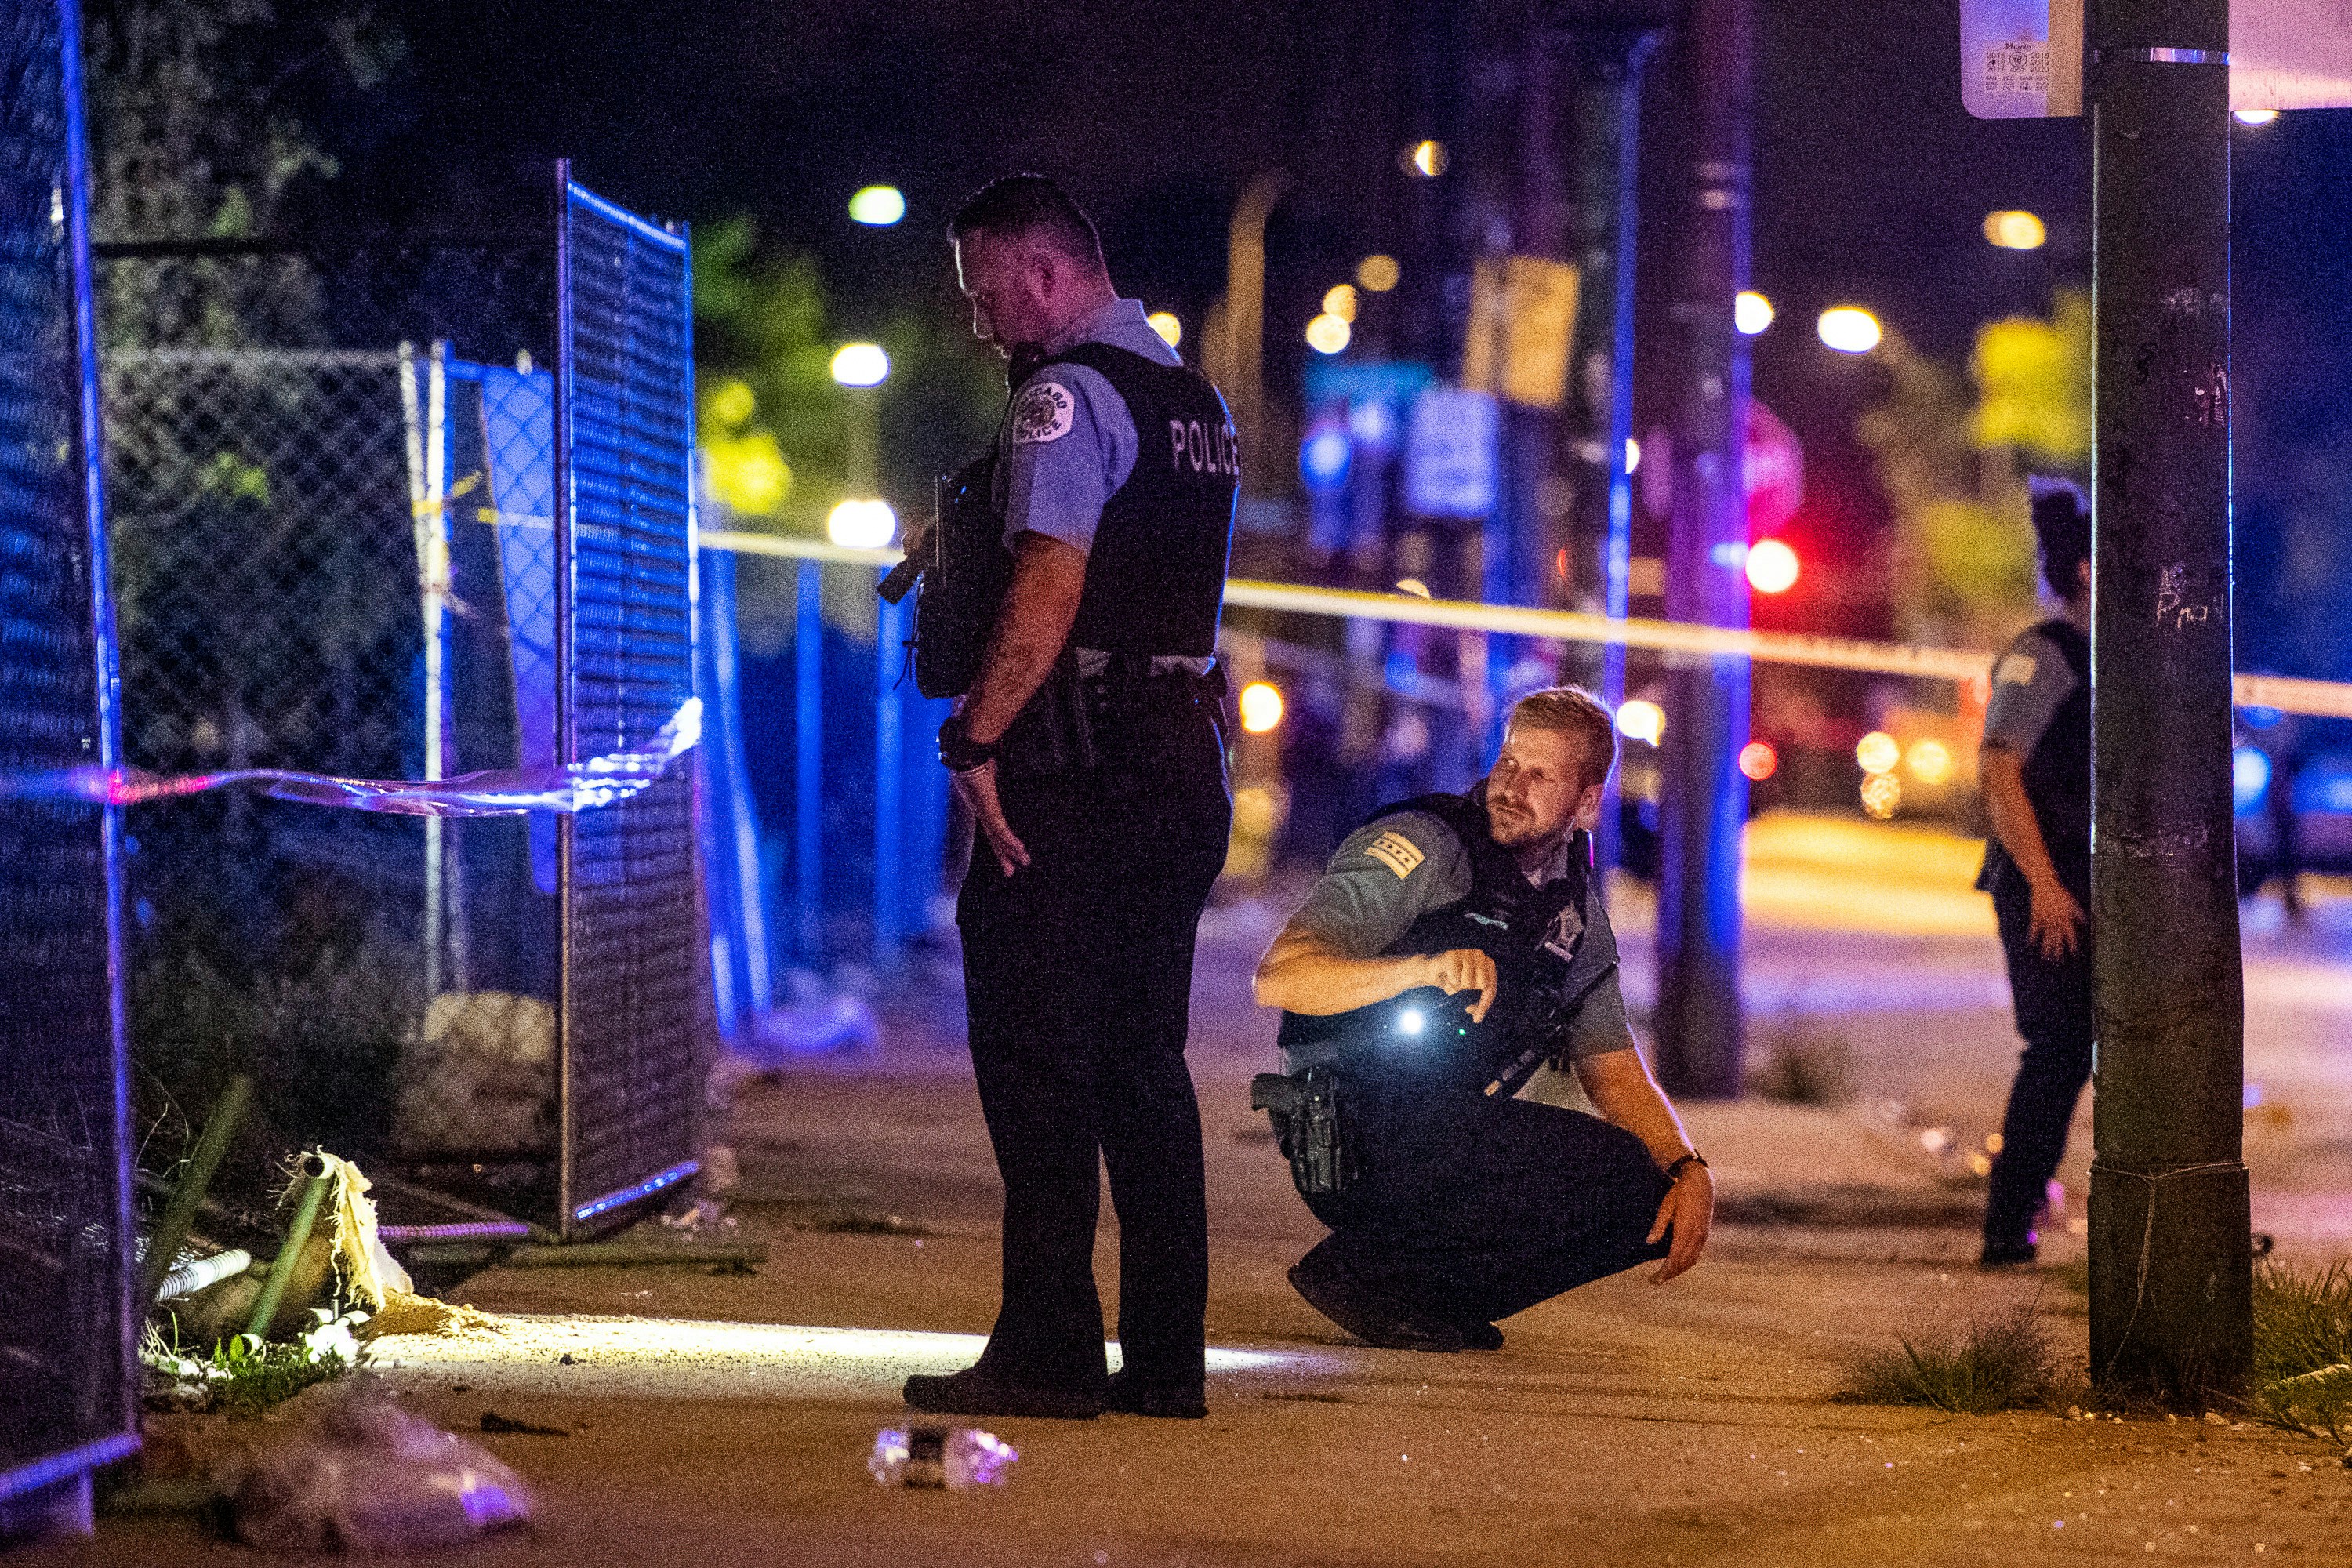 In this Aug. 5, 2018 photo, police investigate the scene where multiple people were shot in Chicago. Police Superintendent Eddie Johnson plans to discuss the violence during a Monday news conference. (Tyler LaRiviere/Chicago Sun-Times via AP)